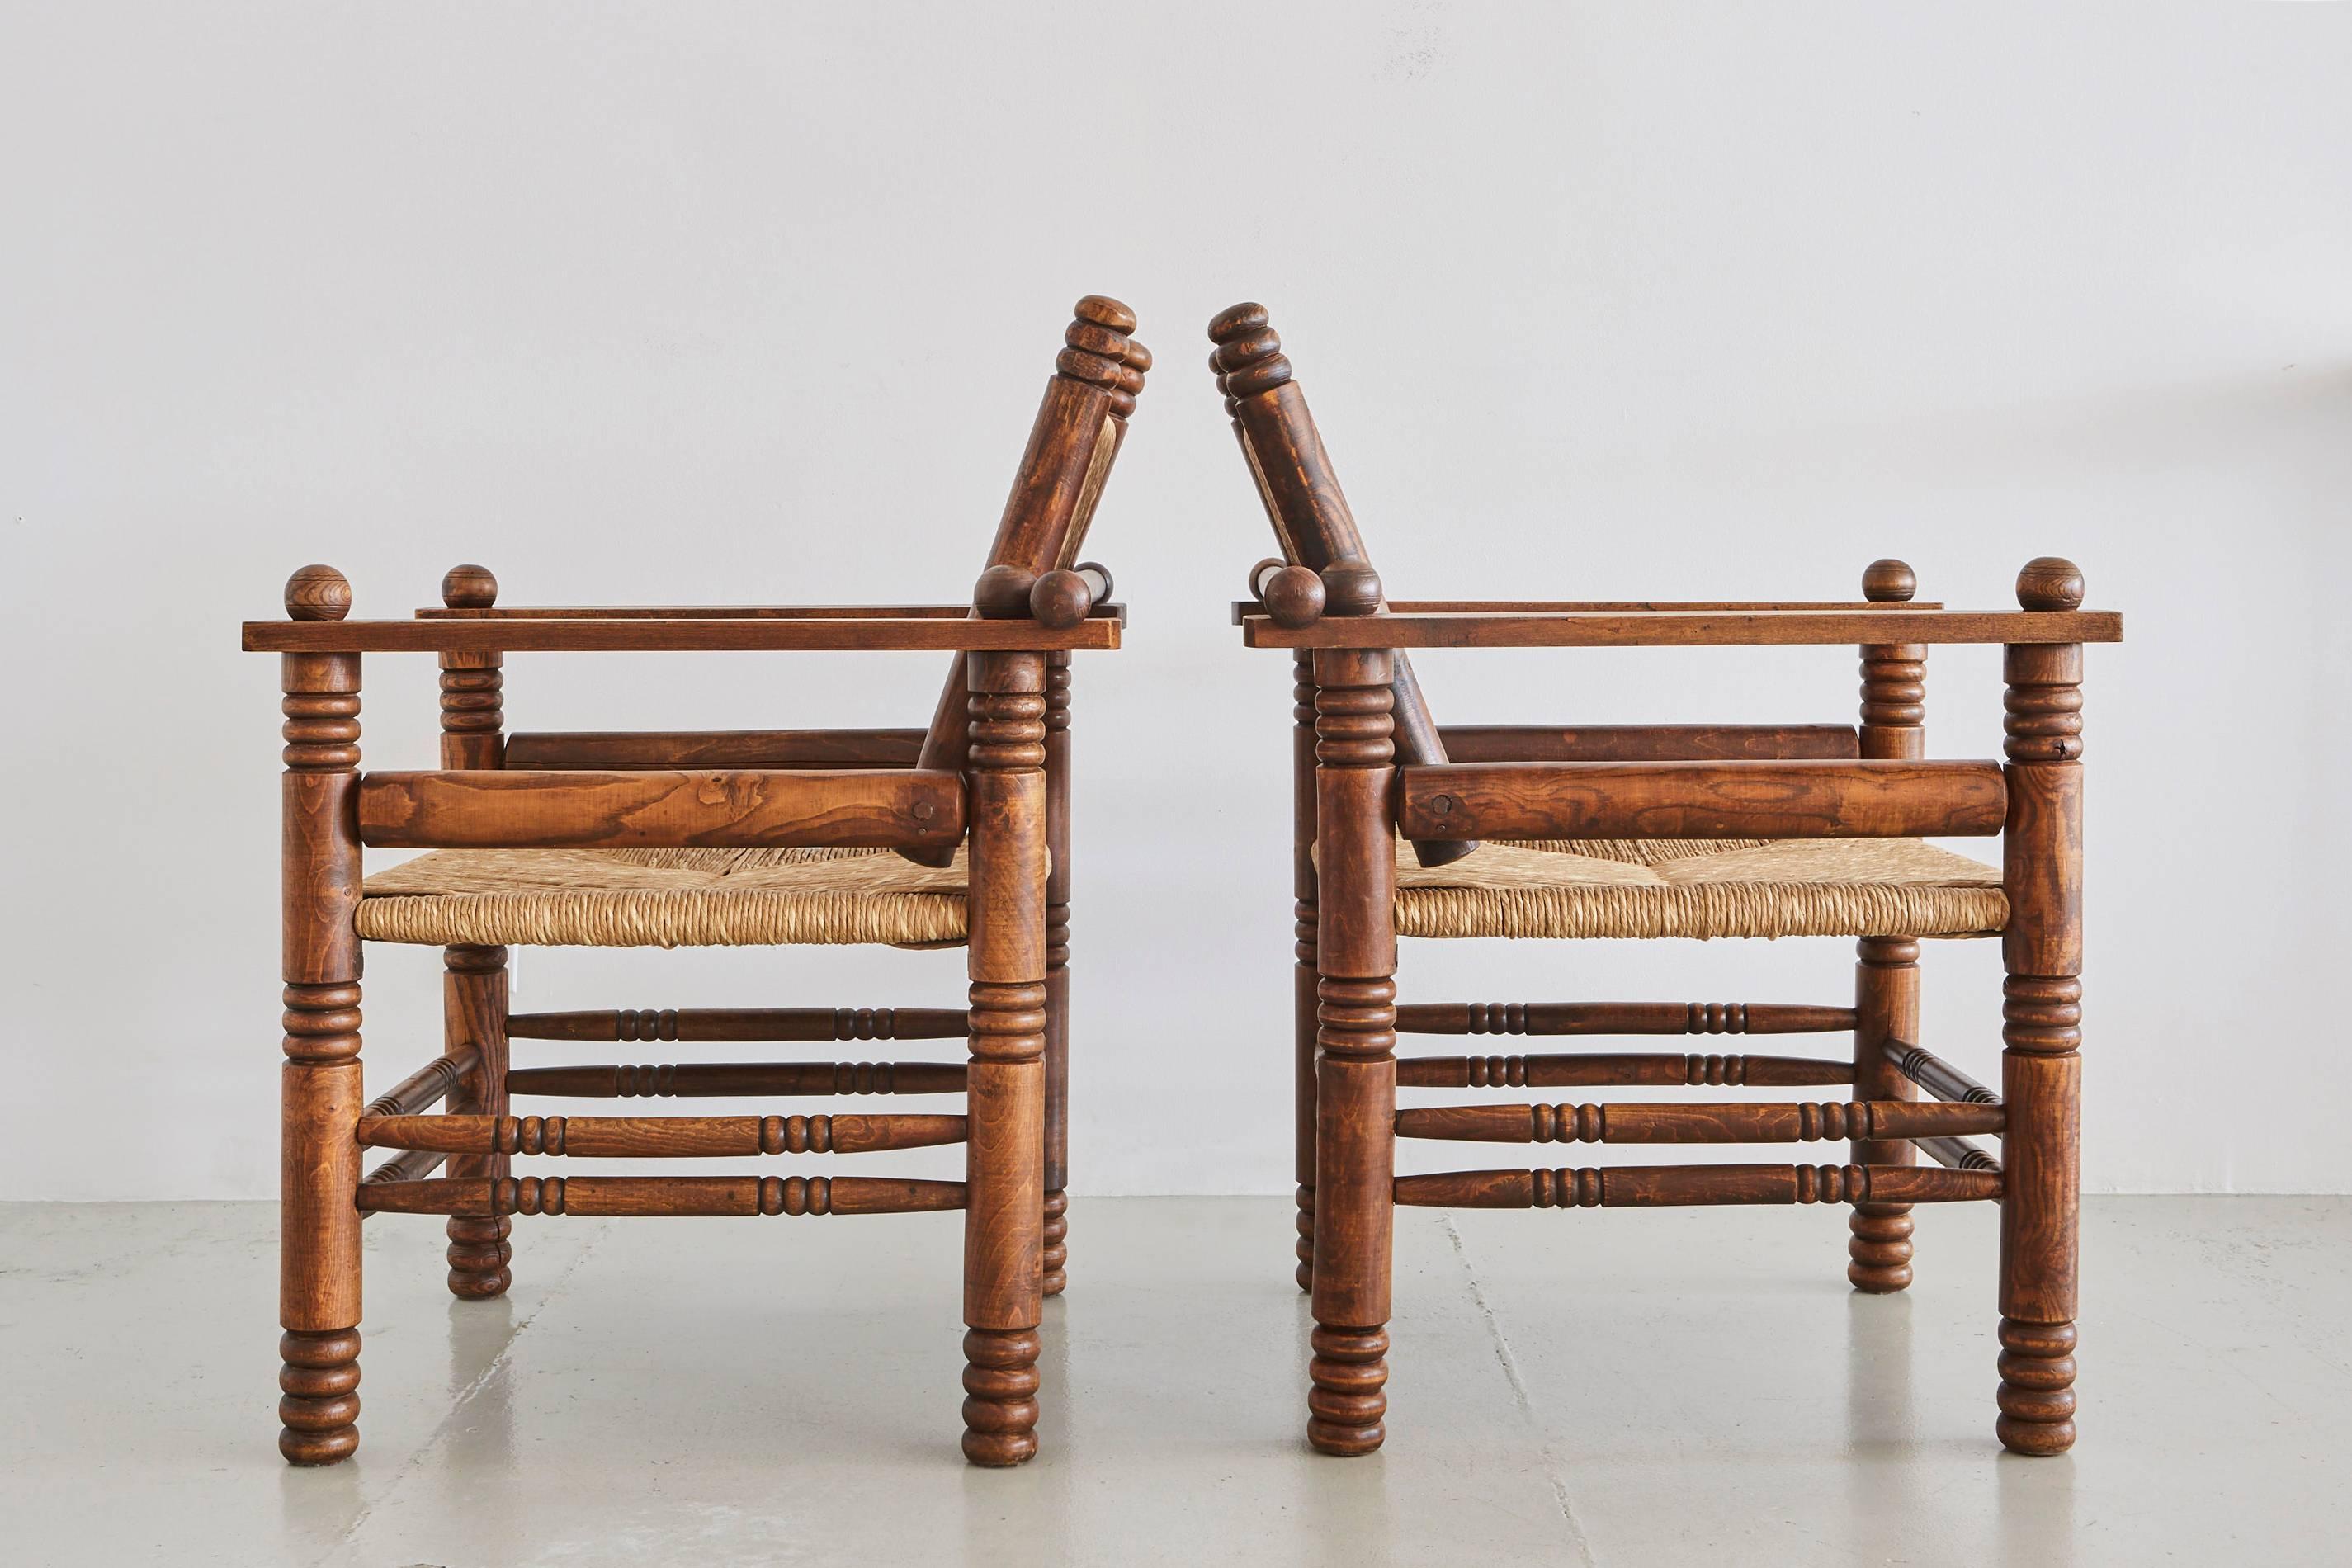 Fantastic pair of Charles Dudouyt attributed chairs with rushed seats and backs, carved oak legs and beautiful patina.
 